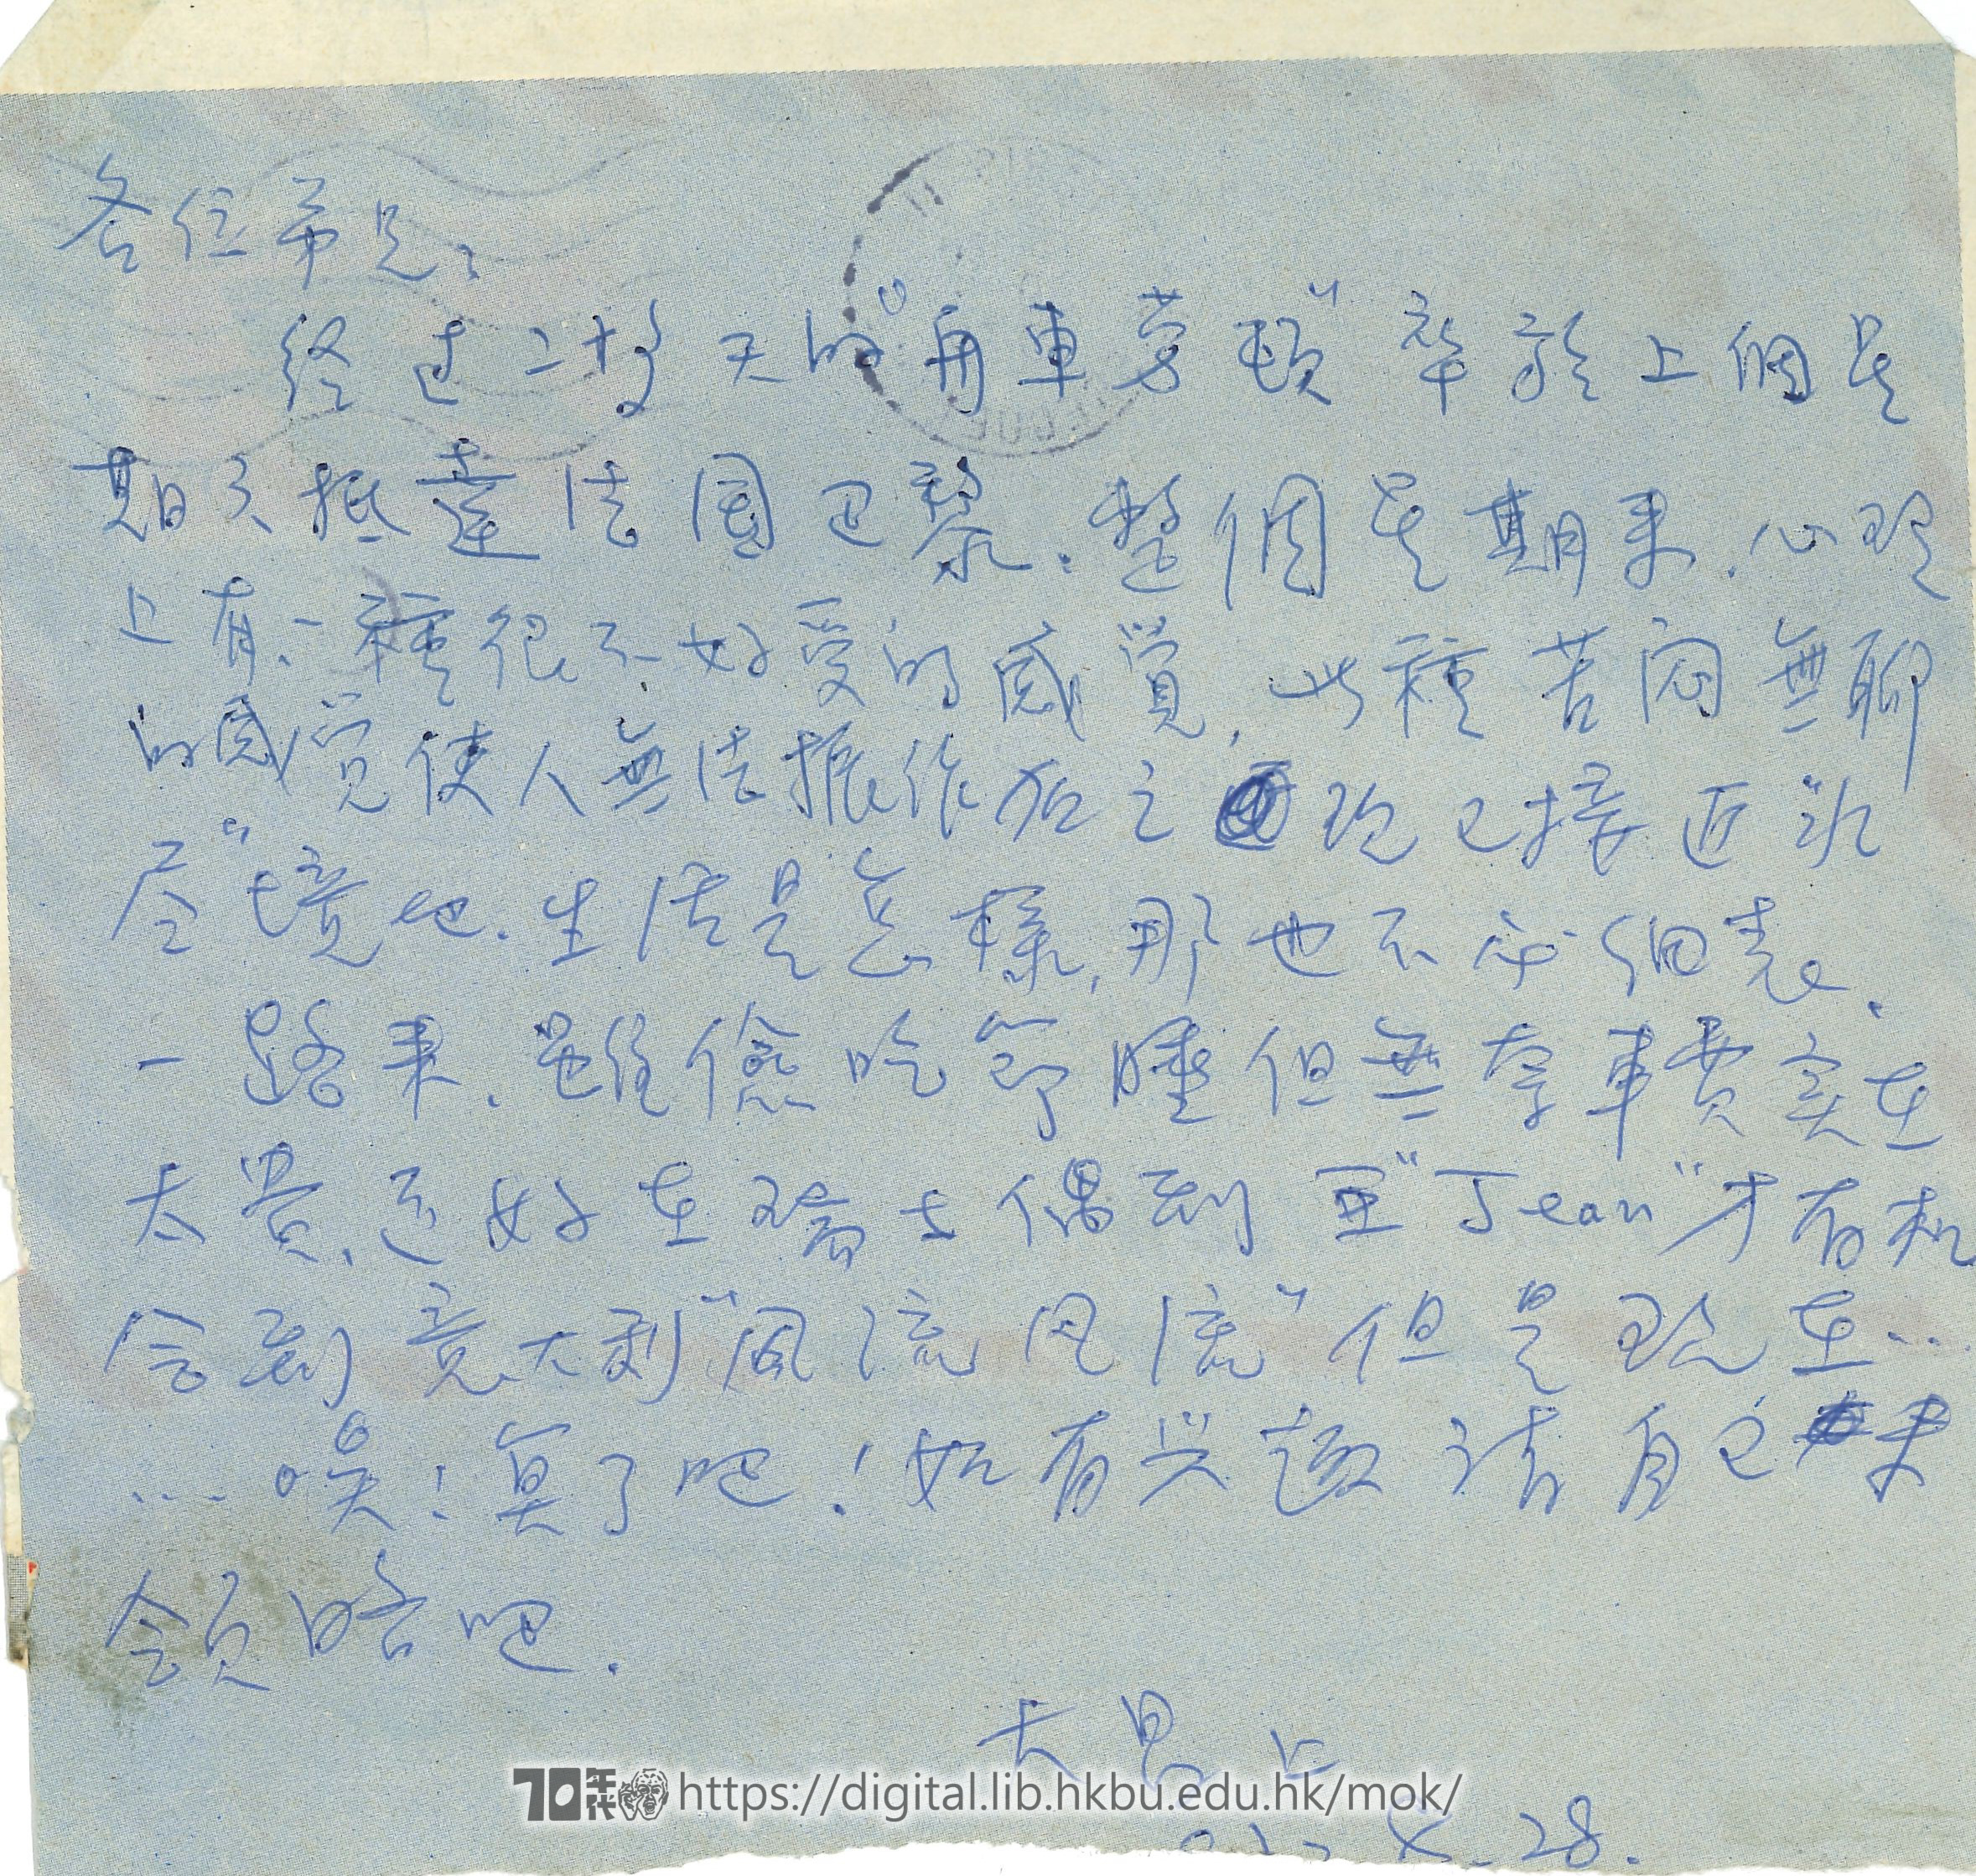   Letter from Lee Kam-fung to friends 李美鳳 